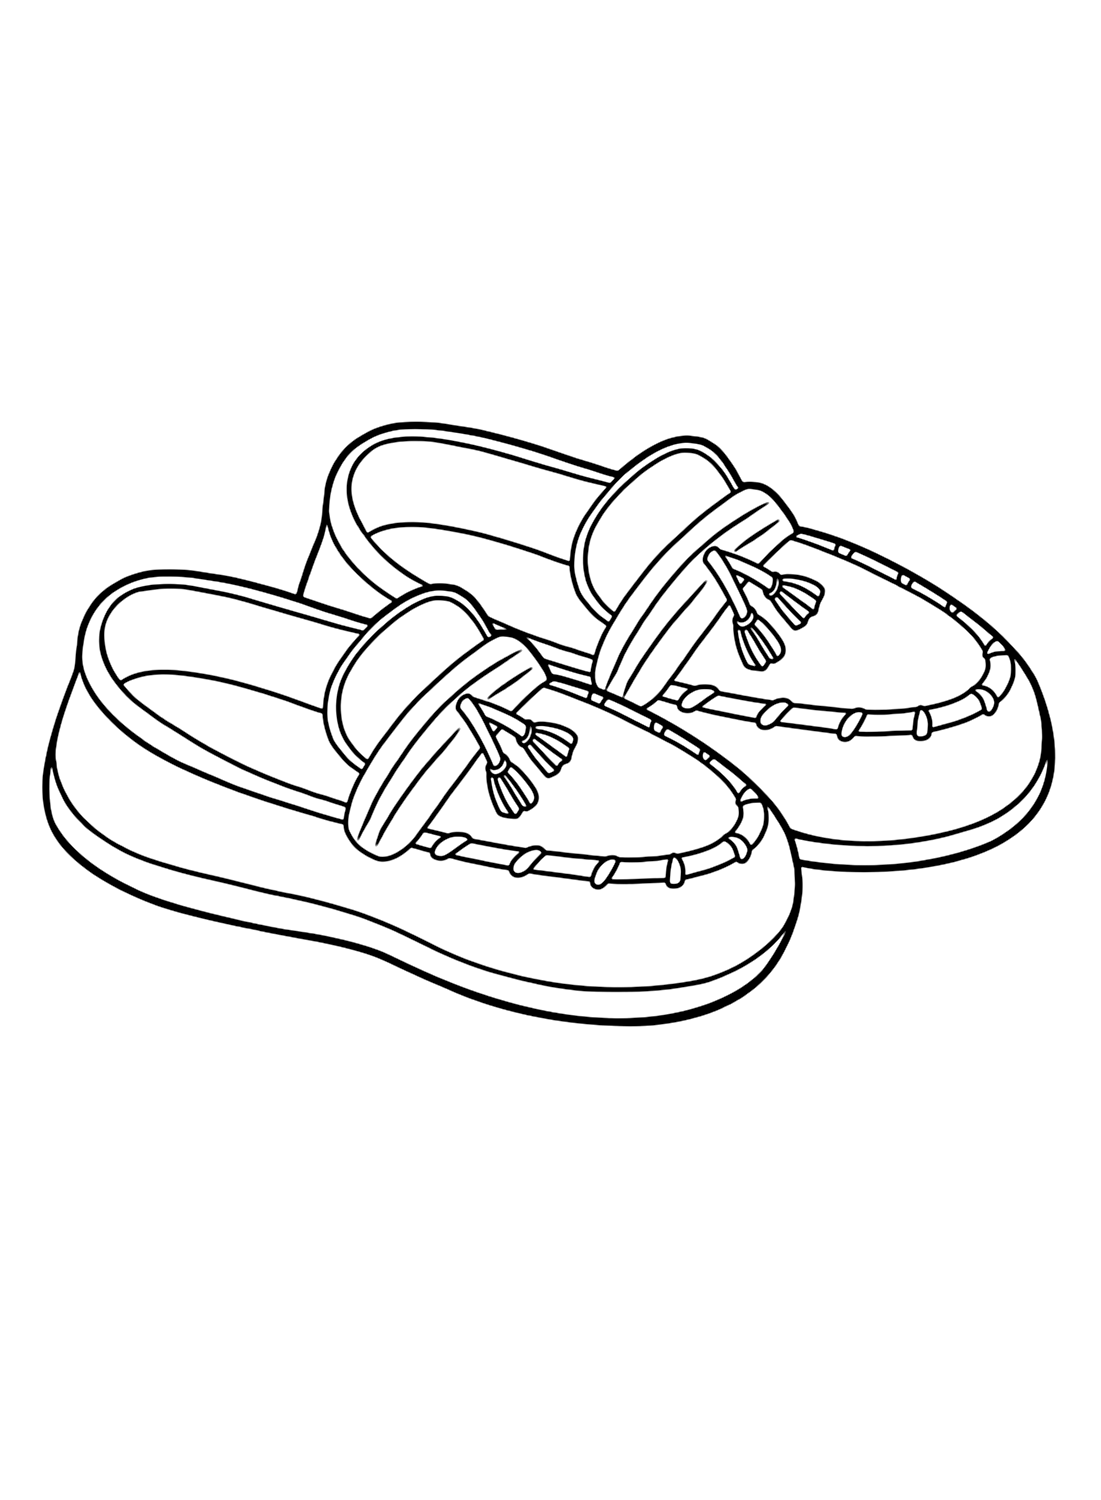 Cute shoe coloring page